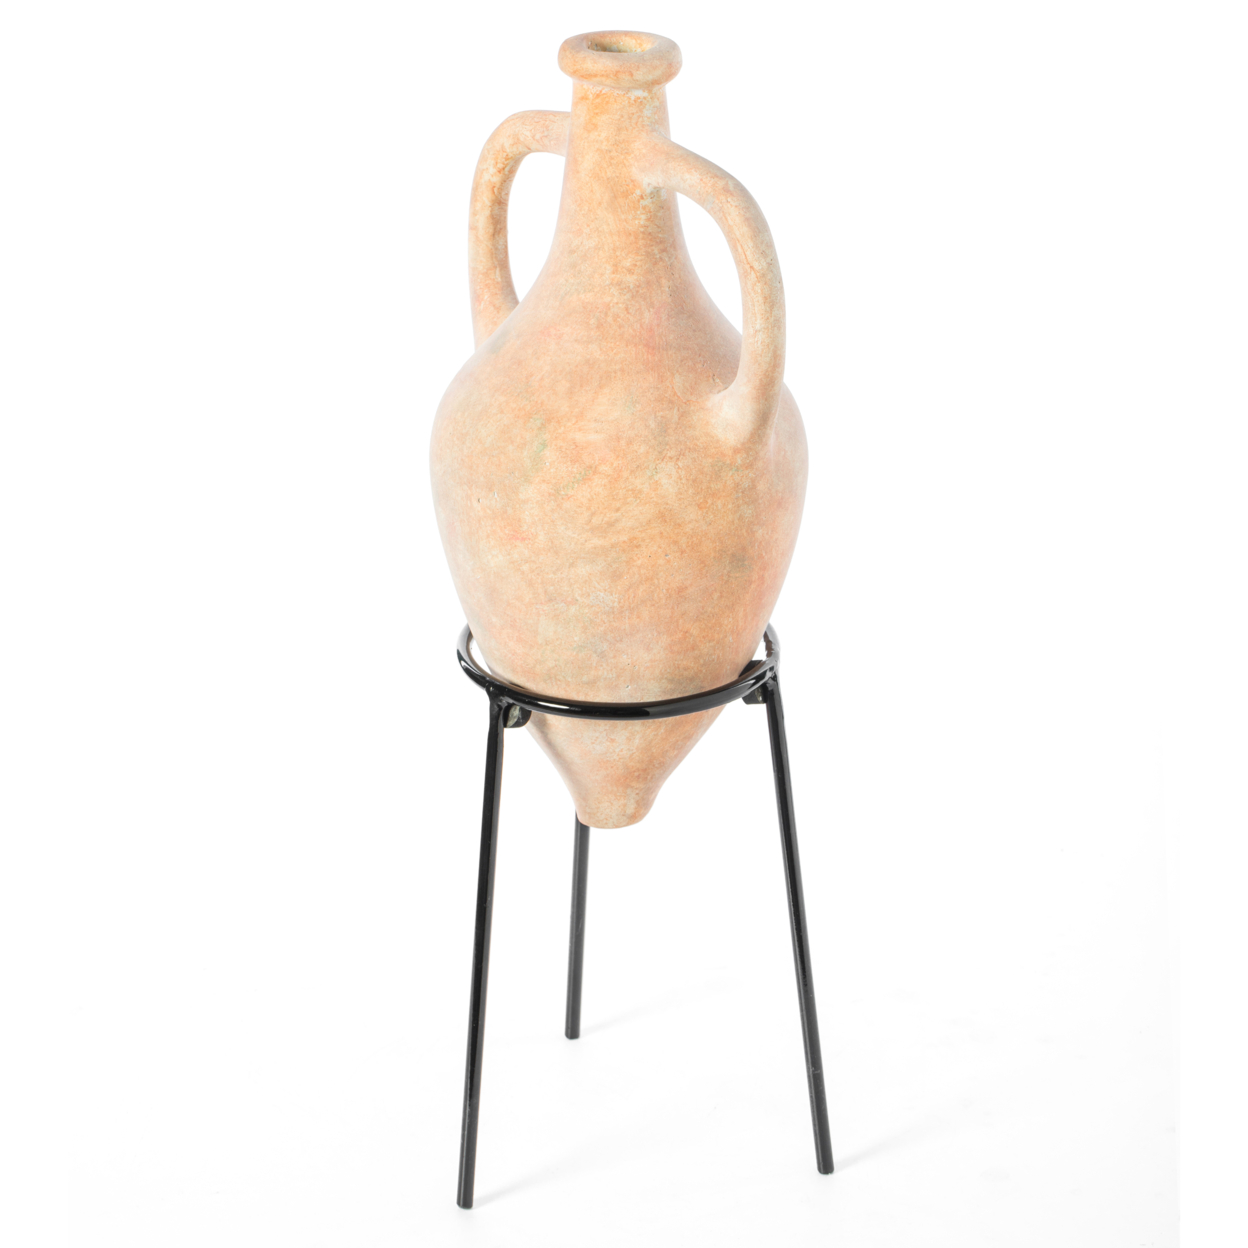 Antique Style Vase, Old Fashioned Magnificent Amphora, Decorative Large Tall Vase, Unique Vase On Slim Black Metal Tripod Stand 21-Inch-Tall